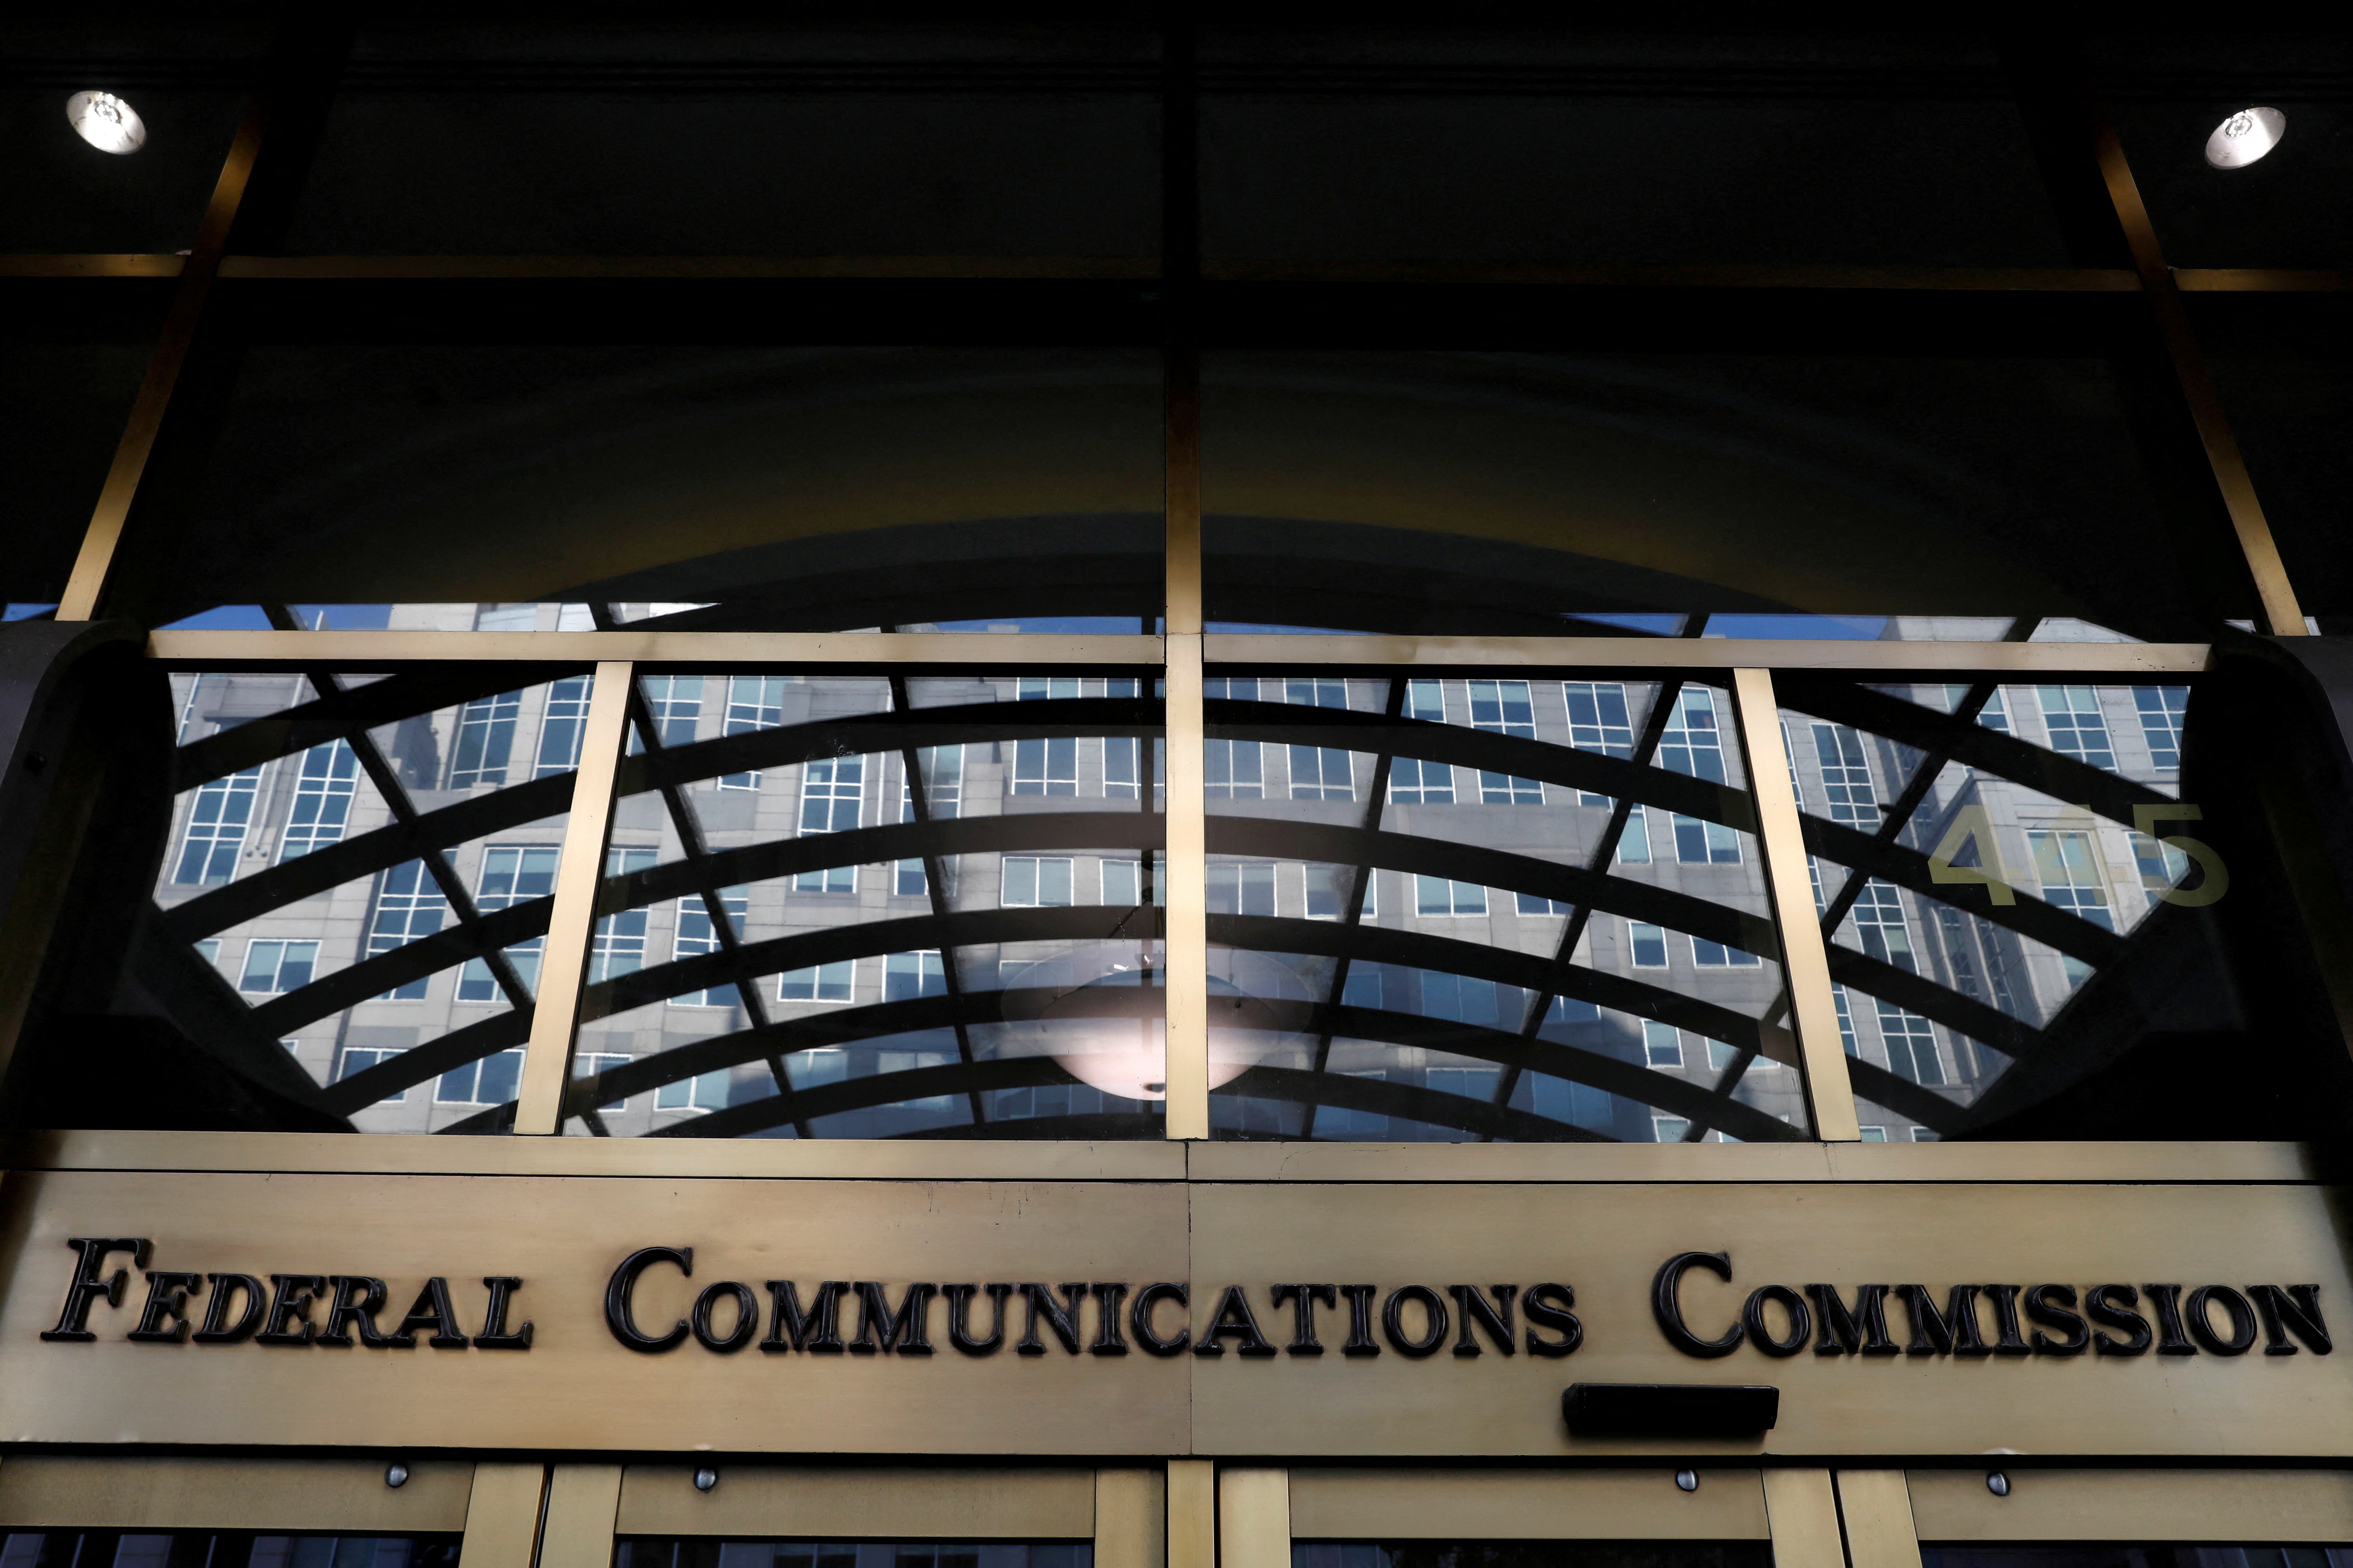 Headquarters of the Federal Communications Commission in Washington, D.C.